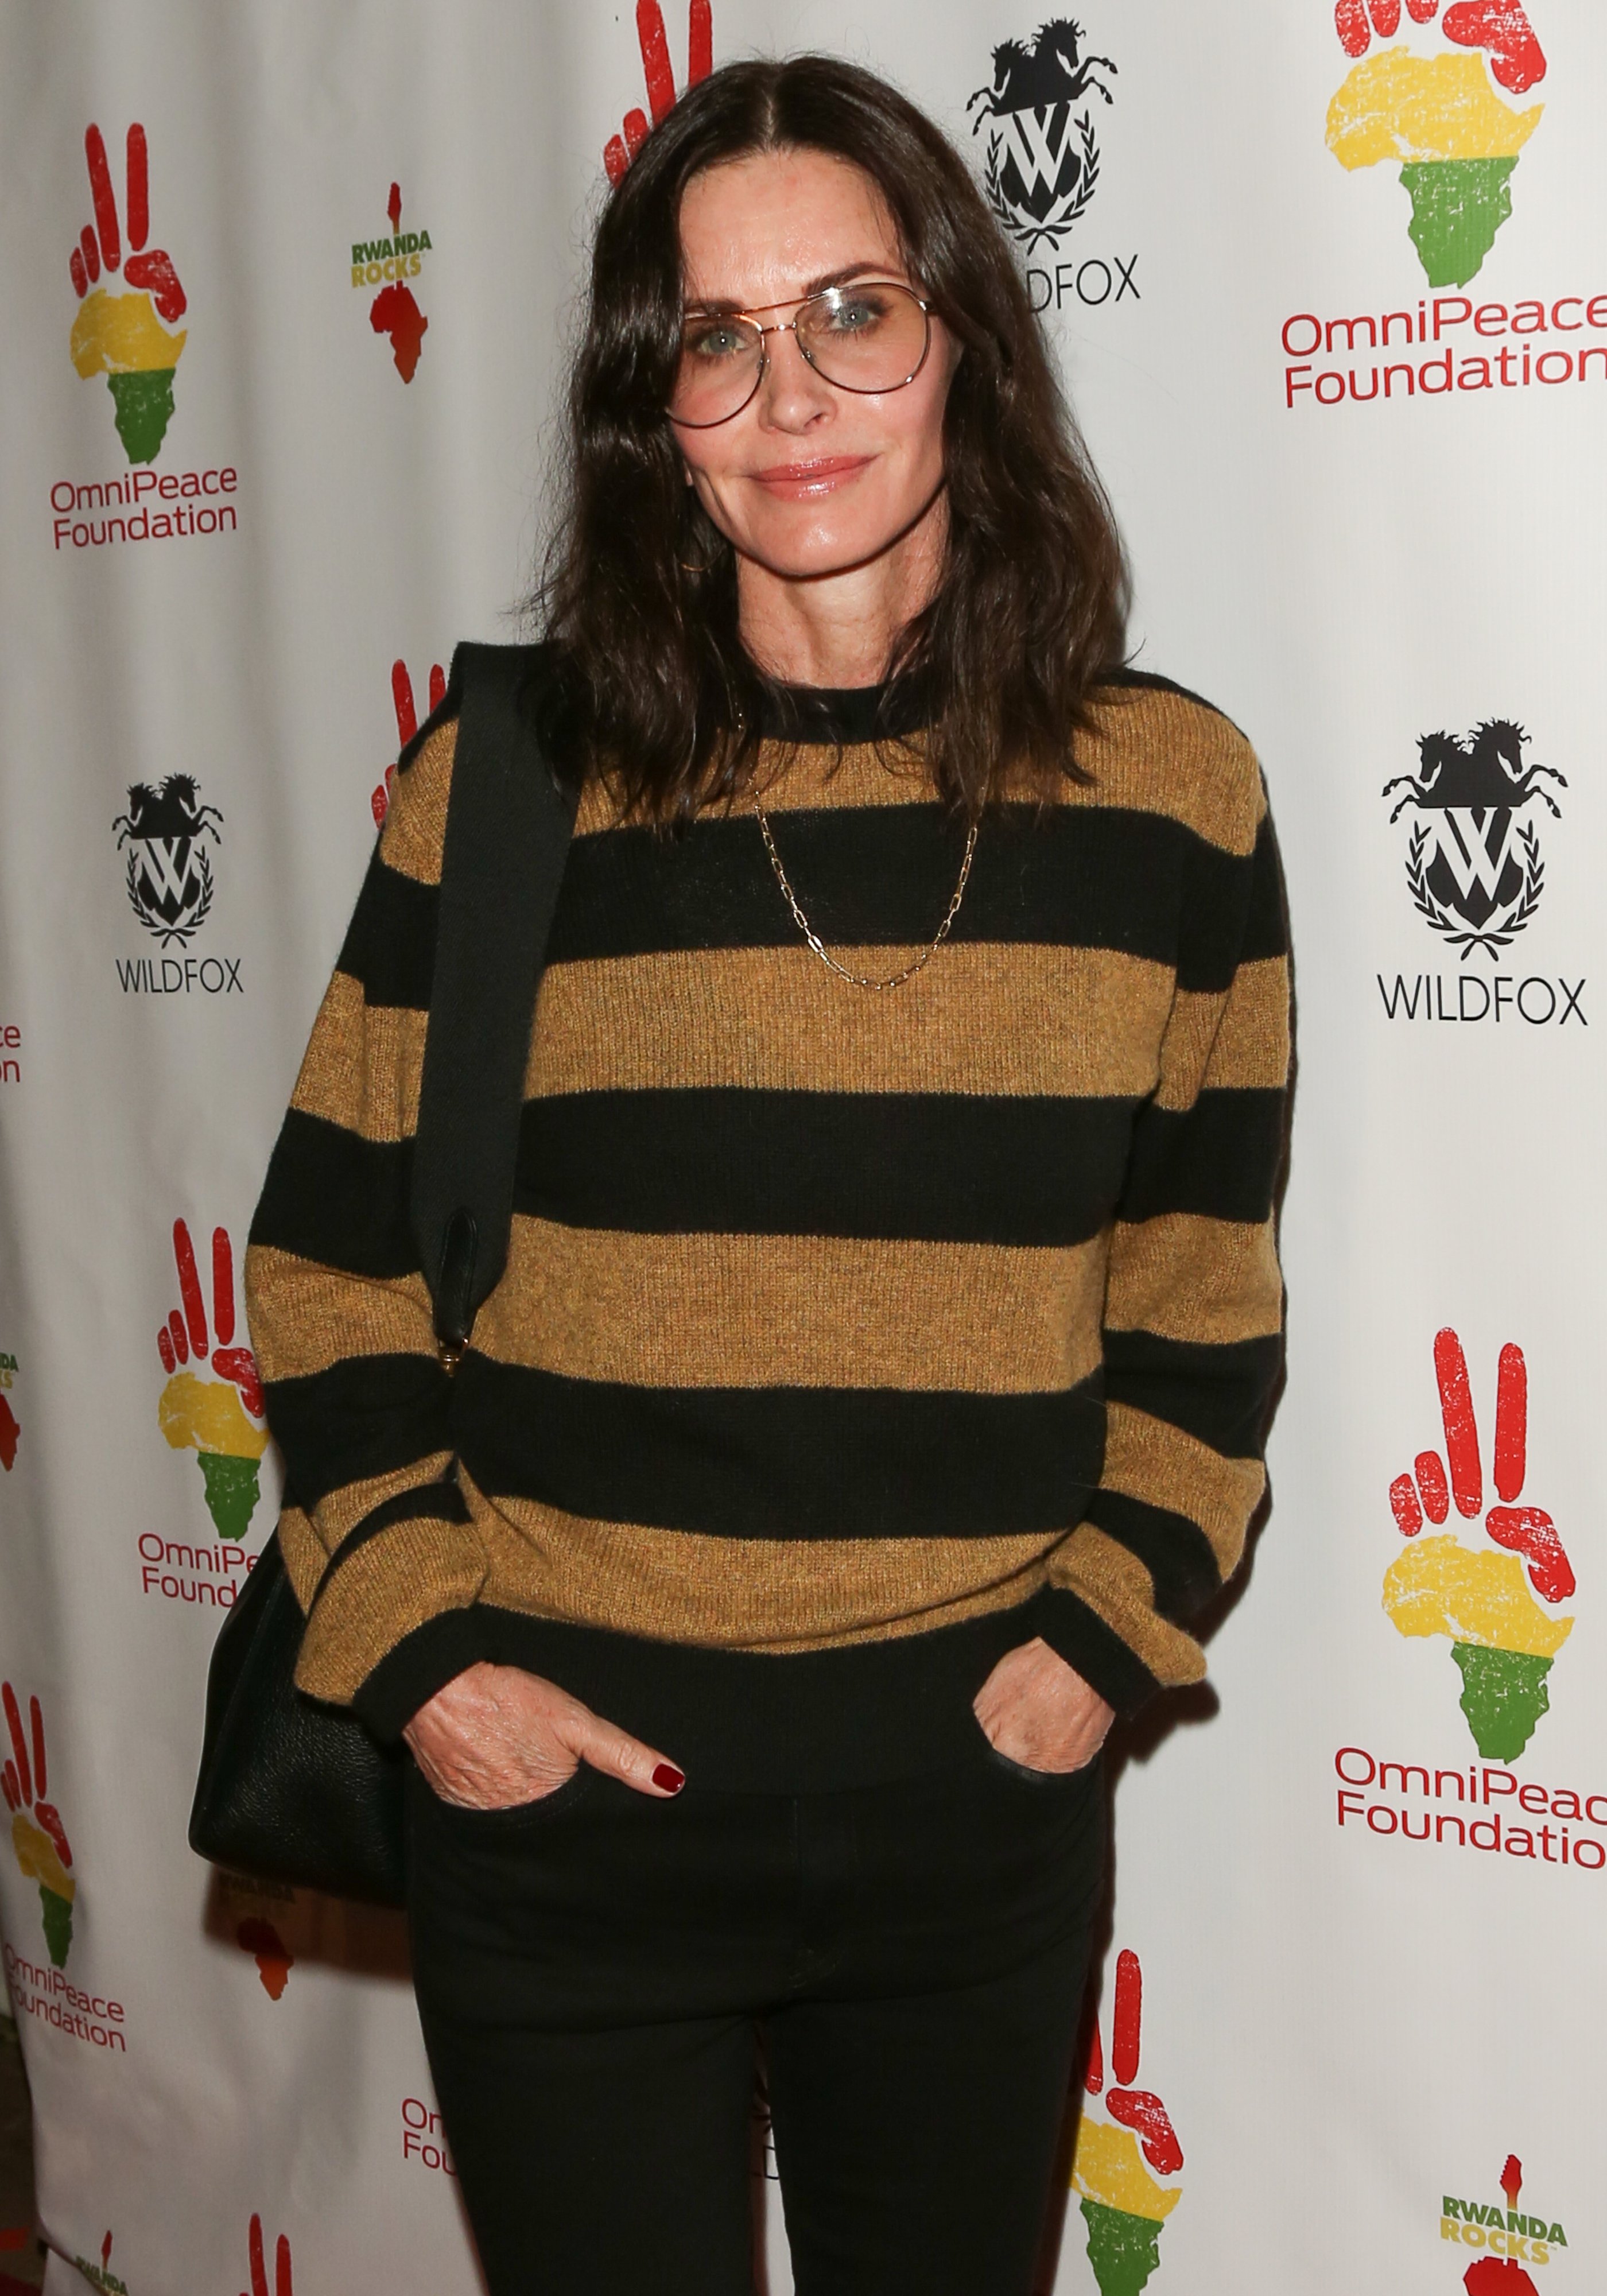 Courteney Cox attends the 2nd Annual Gala "Rwanda Rocks" Charity Event on November 04, 2019| Photo: Getty Images